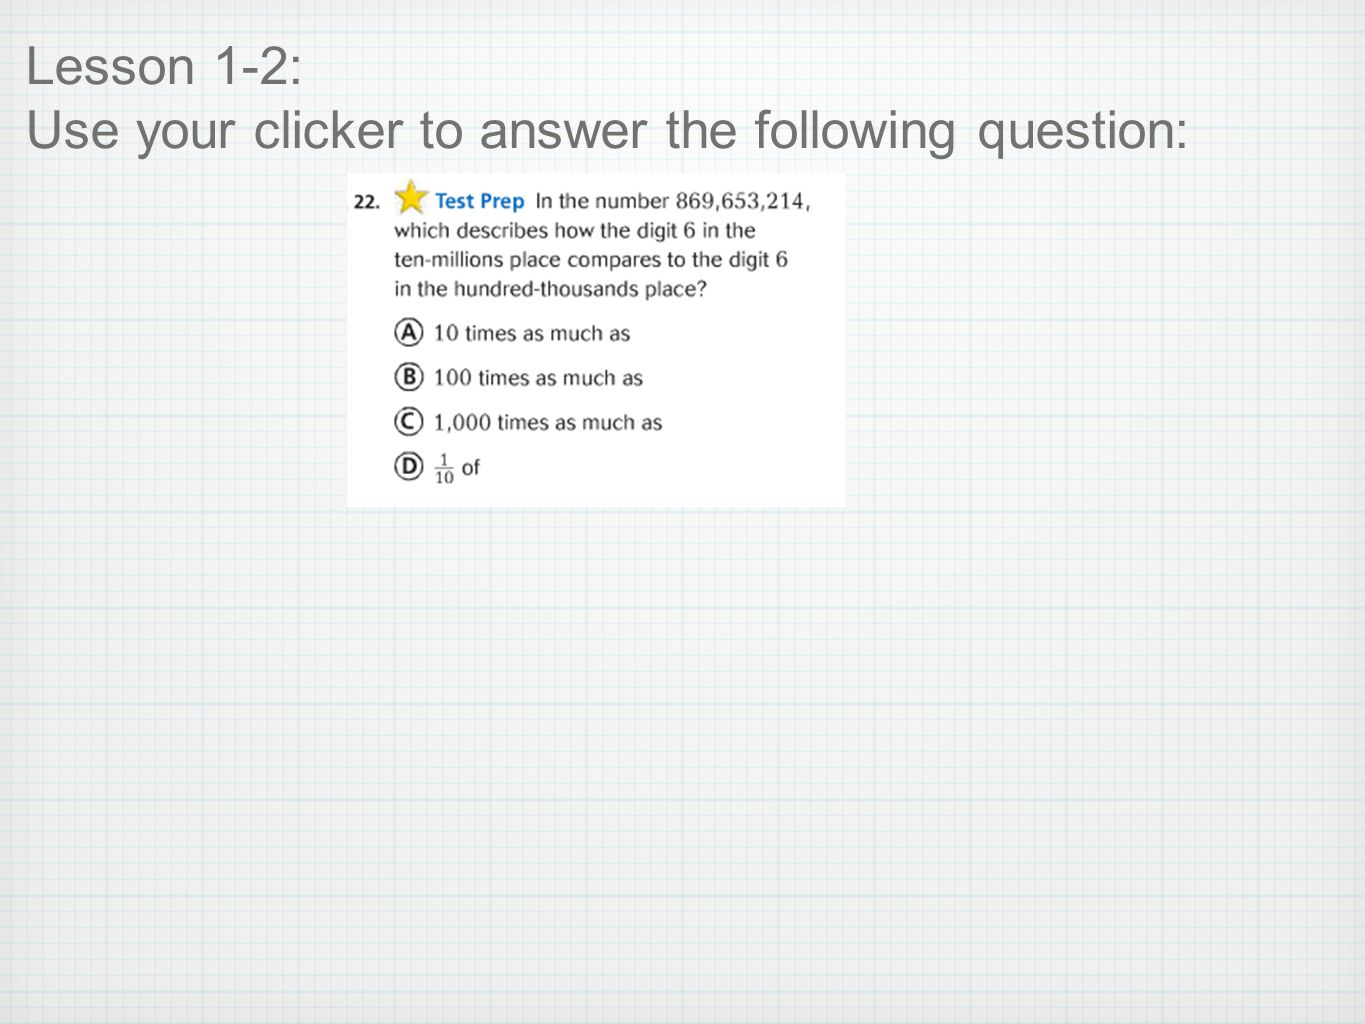 Lesson 1-2: Use your clicker to answer the following question: